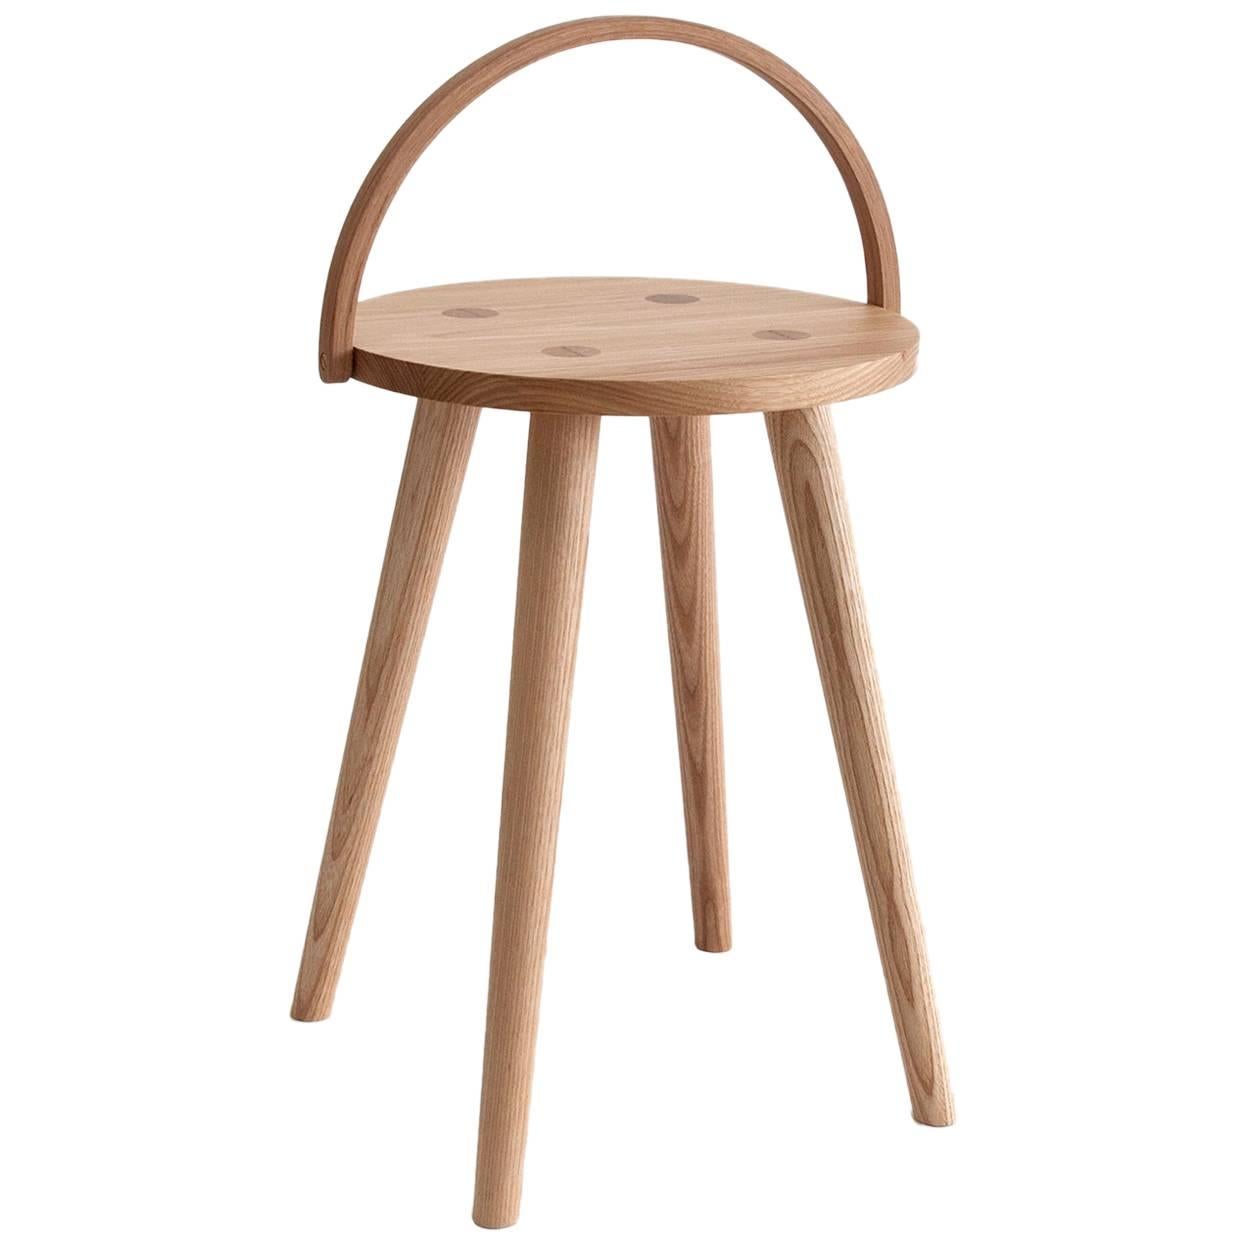 Single Bucket Stool, Seat, Side Table with Bentwood Handle in Solid Ash